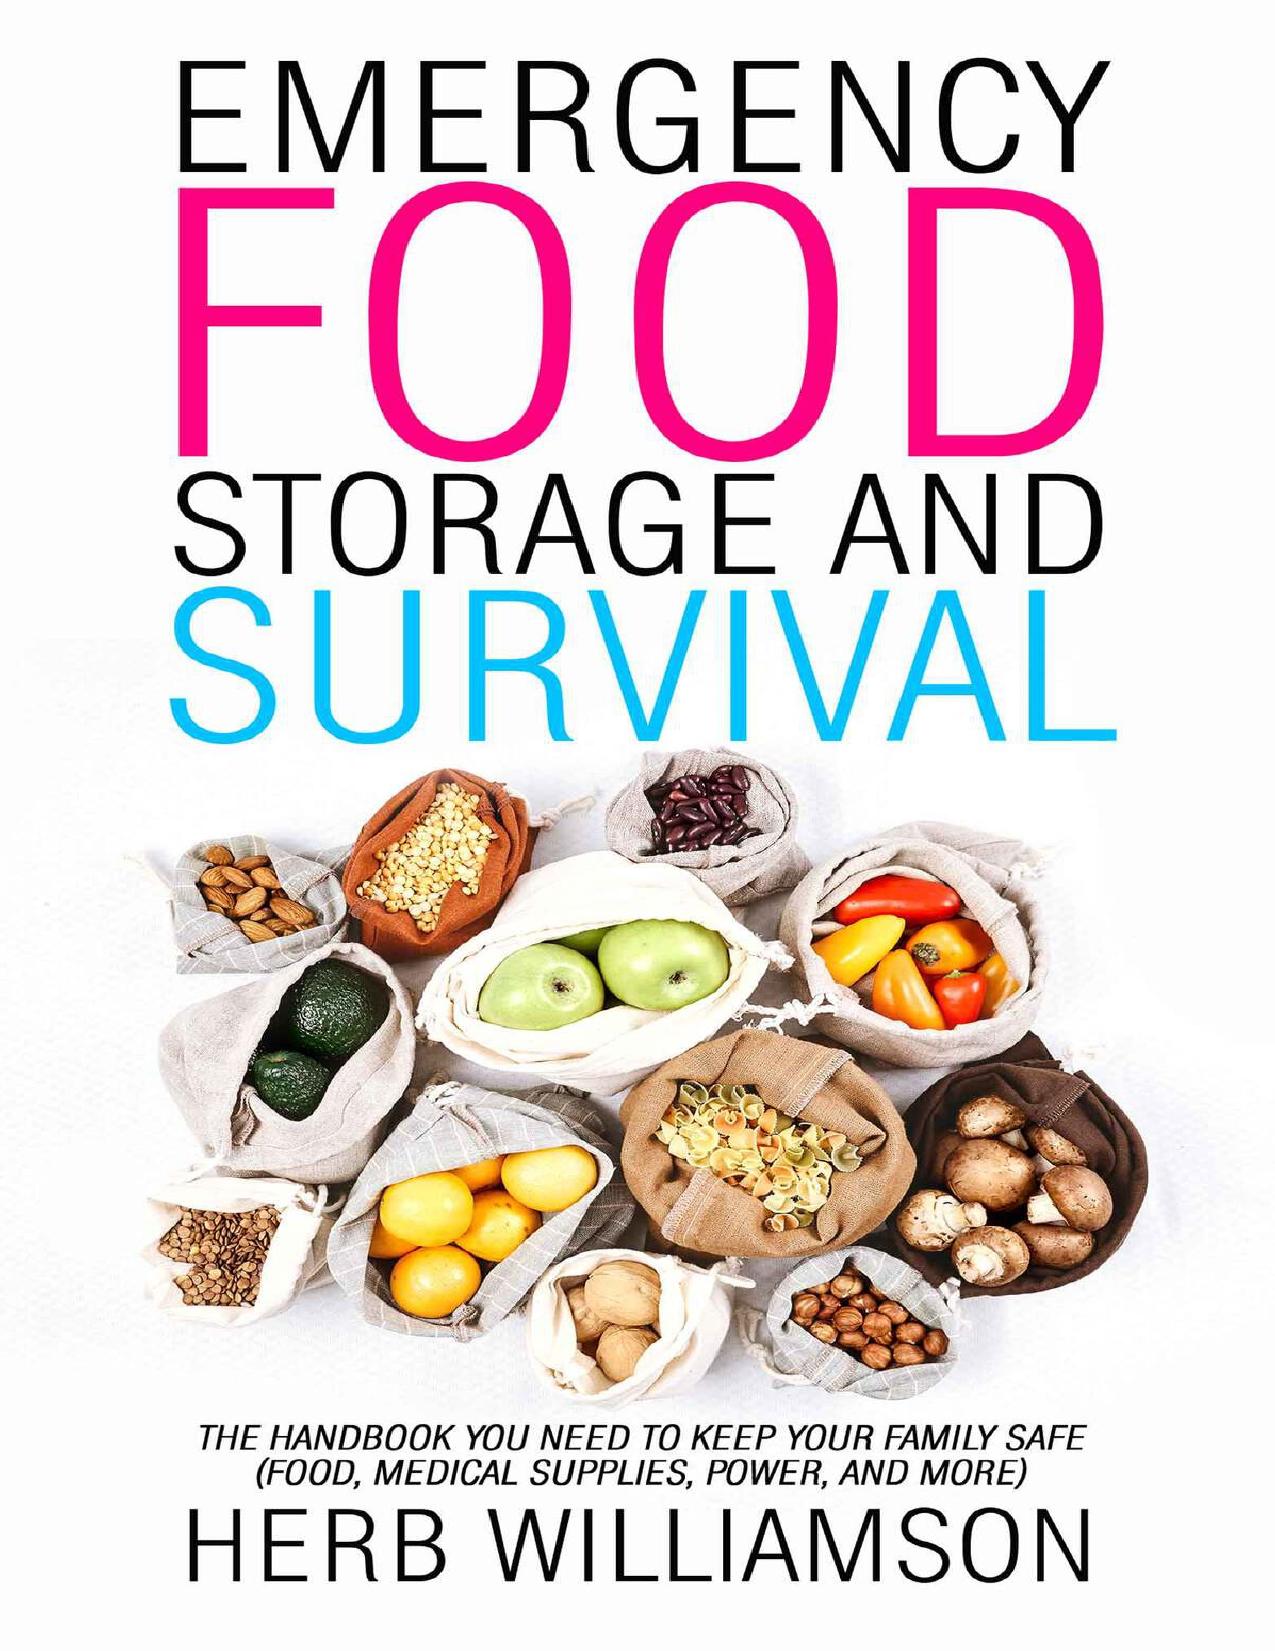 Emergency Food Storage and Survival: The Handbook You Need to Keep Your Family Safe (Food, Medical Supplies, Power, and More) by Williamson Herb